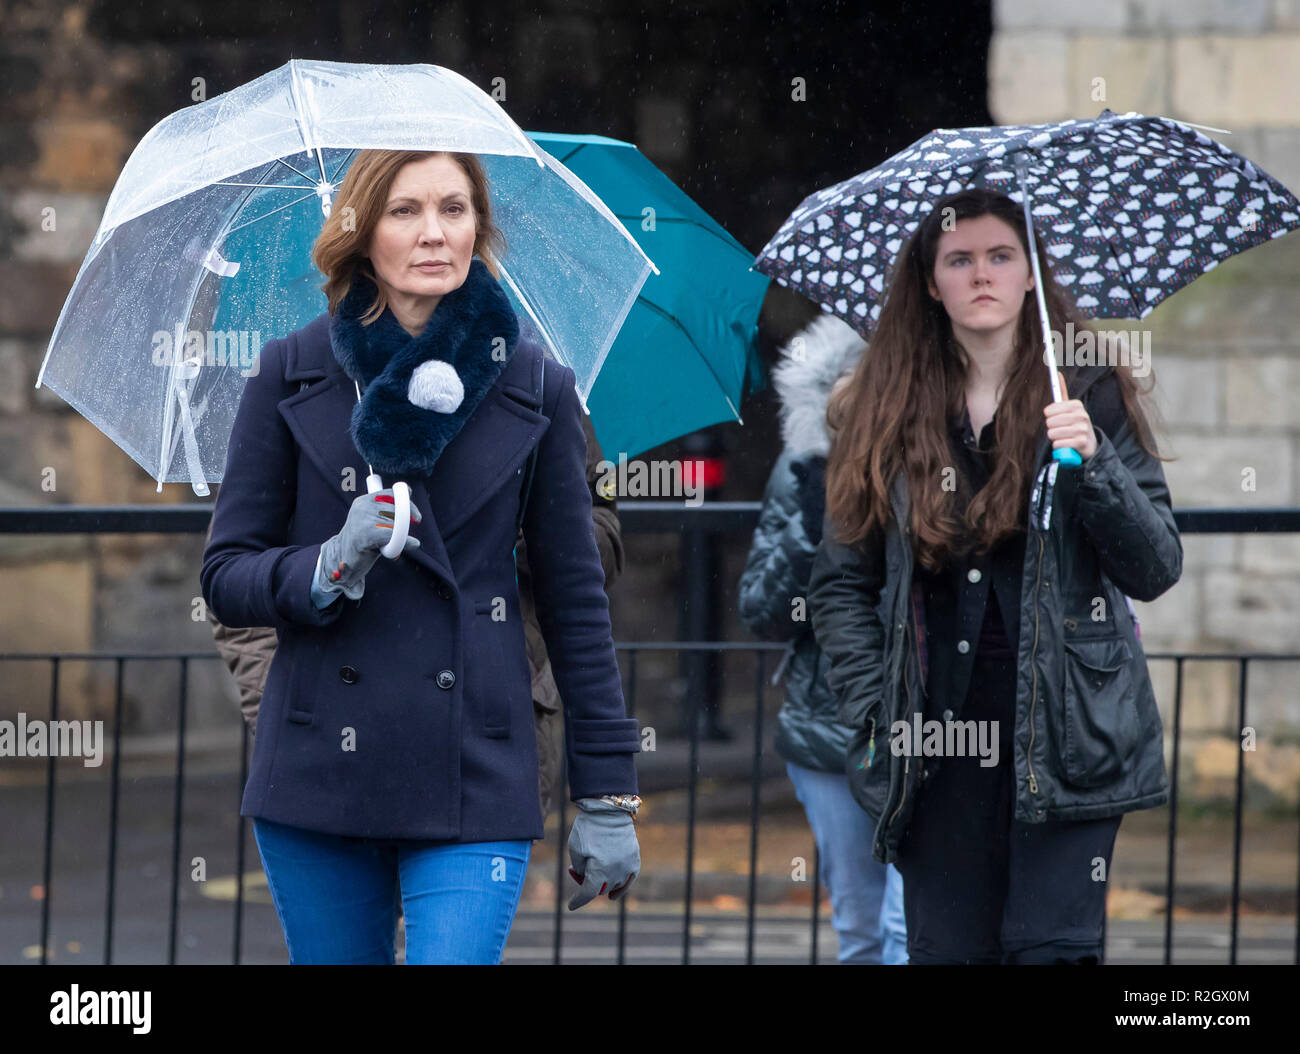 People in bad weather in York , North Yorkshire, as temperatures plummet across the UK. Stock Photo